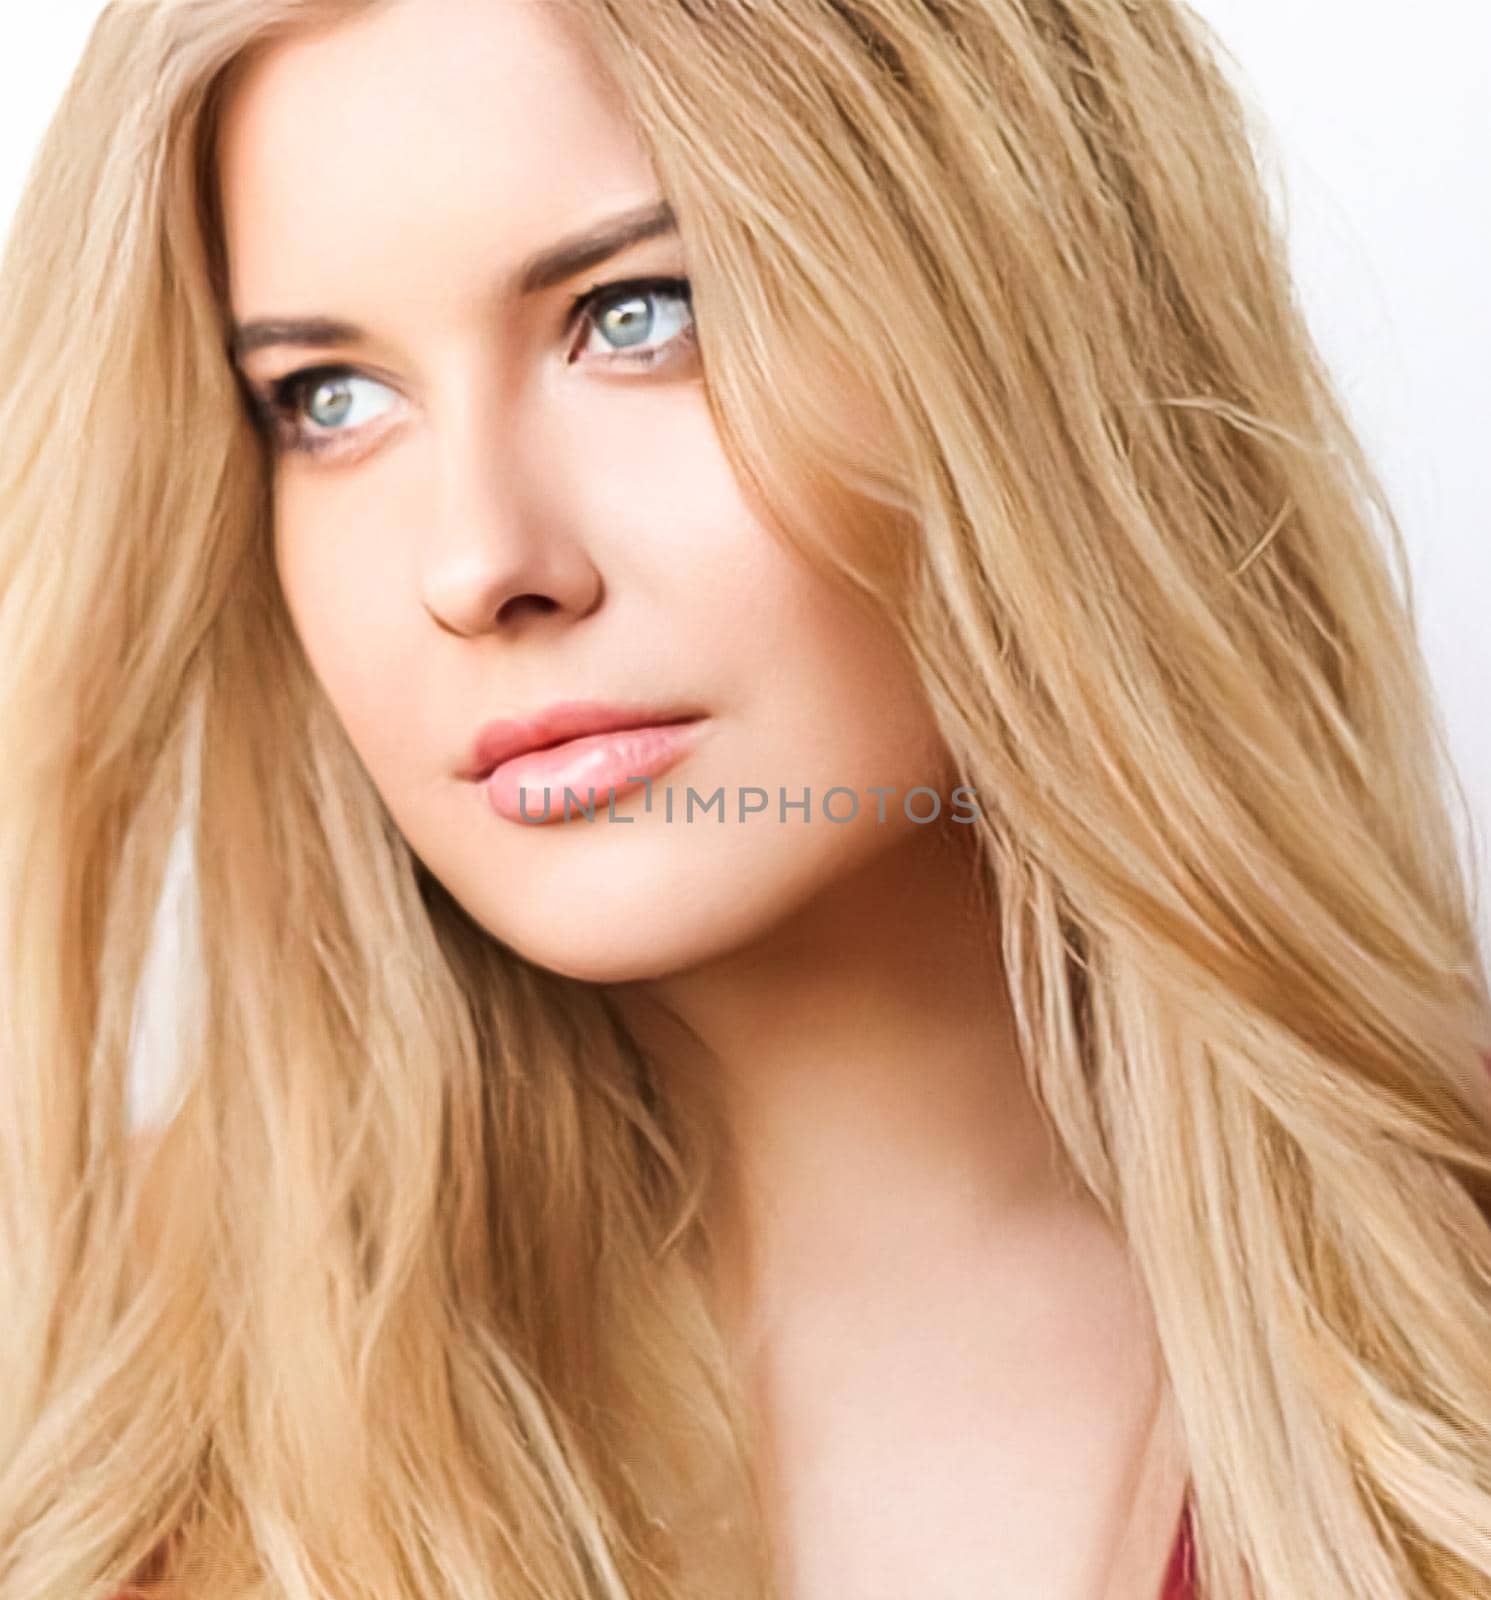 Hairstyle, beauty and hair care, beautiful blonde woman with long blond hair, glamour portrait for hair salon and haircare brand